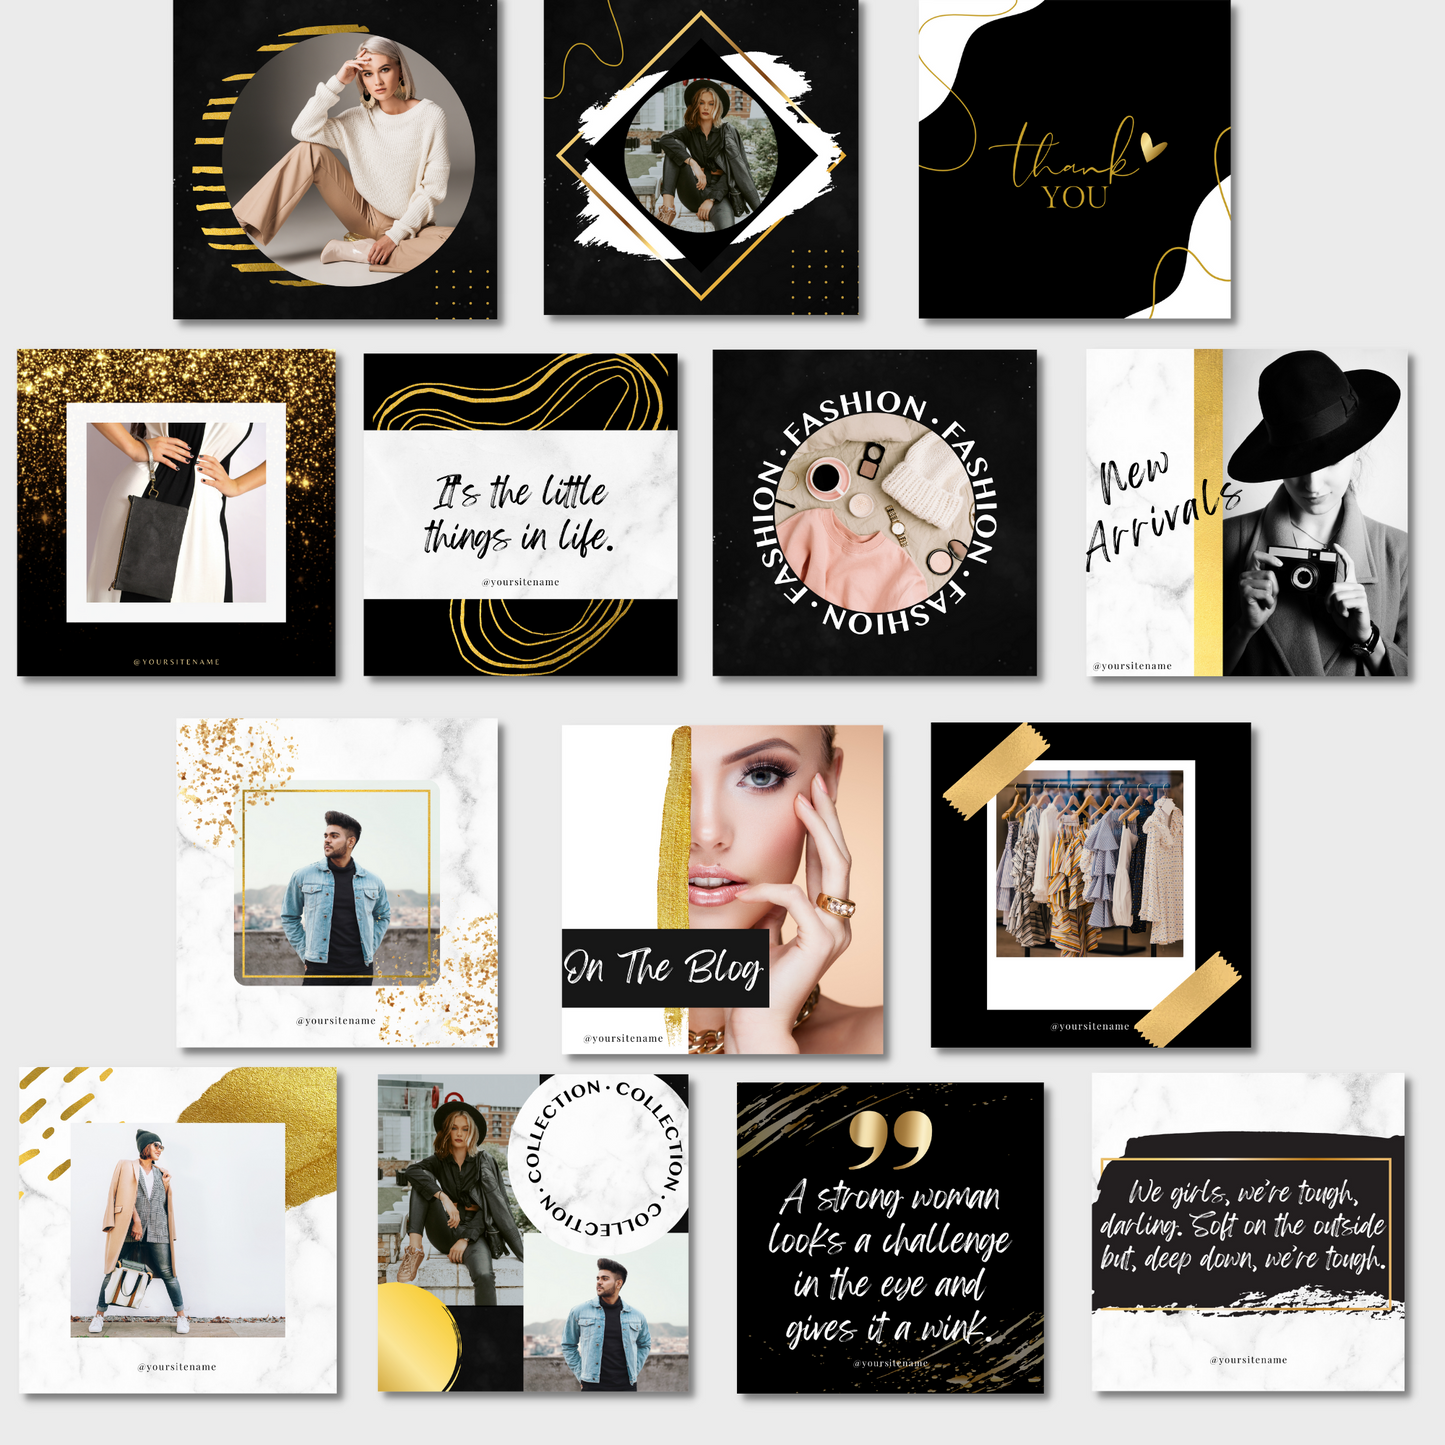 22 Black and Gold Fashion Instagram Post Templates | Editable in Canva | IG Engagement | Social Media Posts